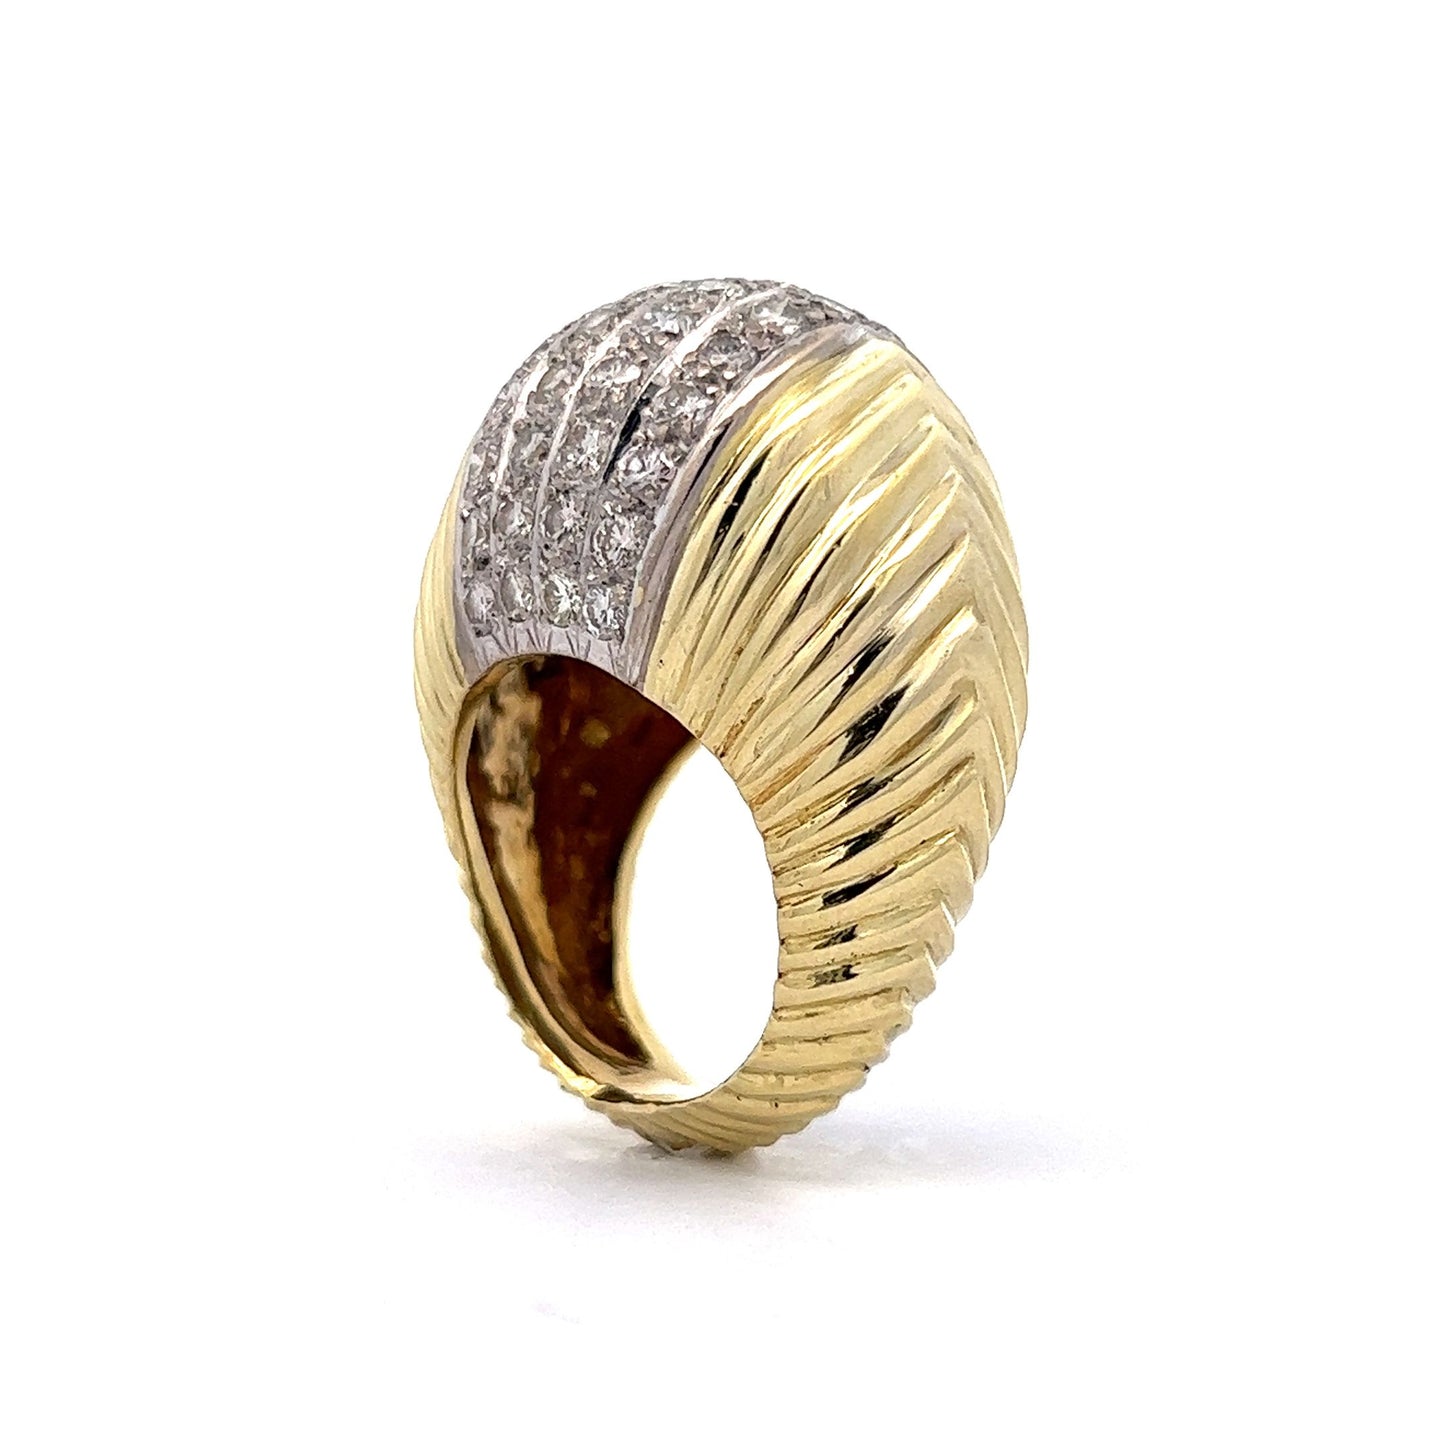 4.16 Mid-Century Pave Diamond Cocktail Ring in 18k Yellow Gold